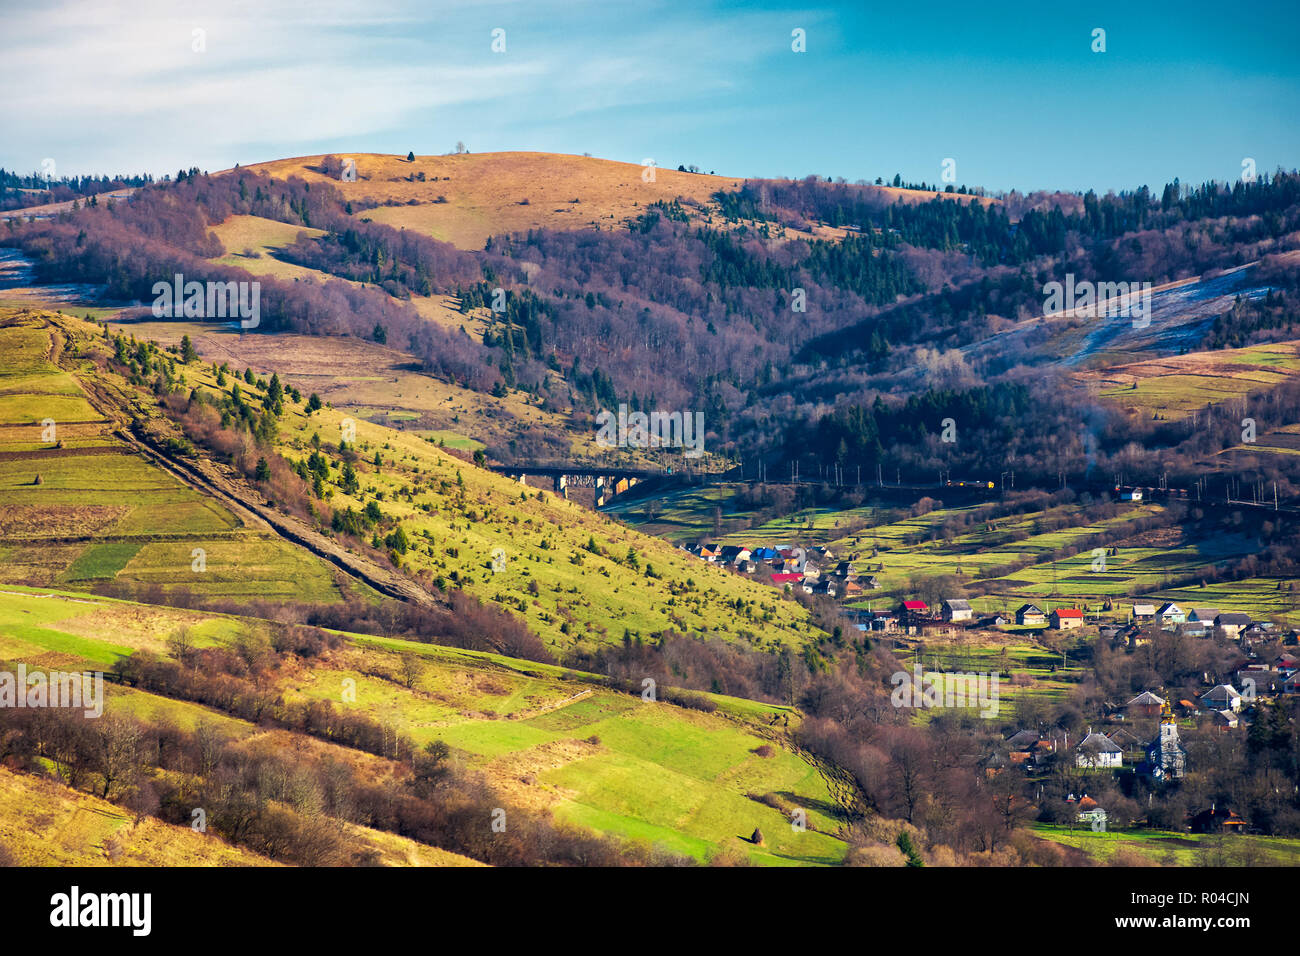 village in a valley. november weather. grassy rural fields on hills above settlement. lovely sunny day. Stock Photo